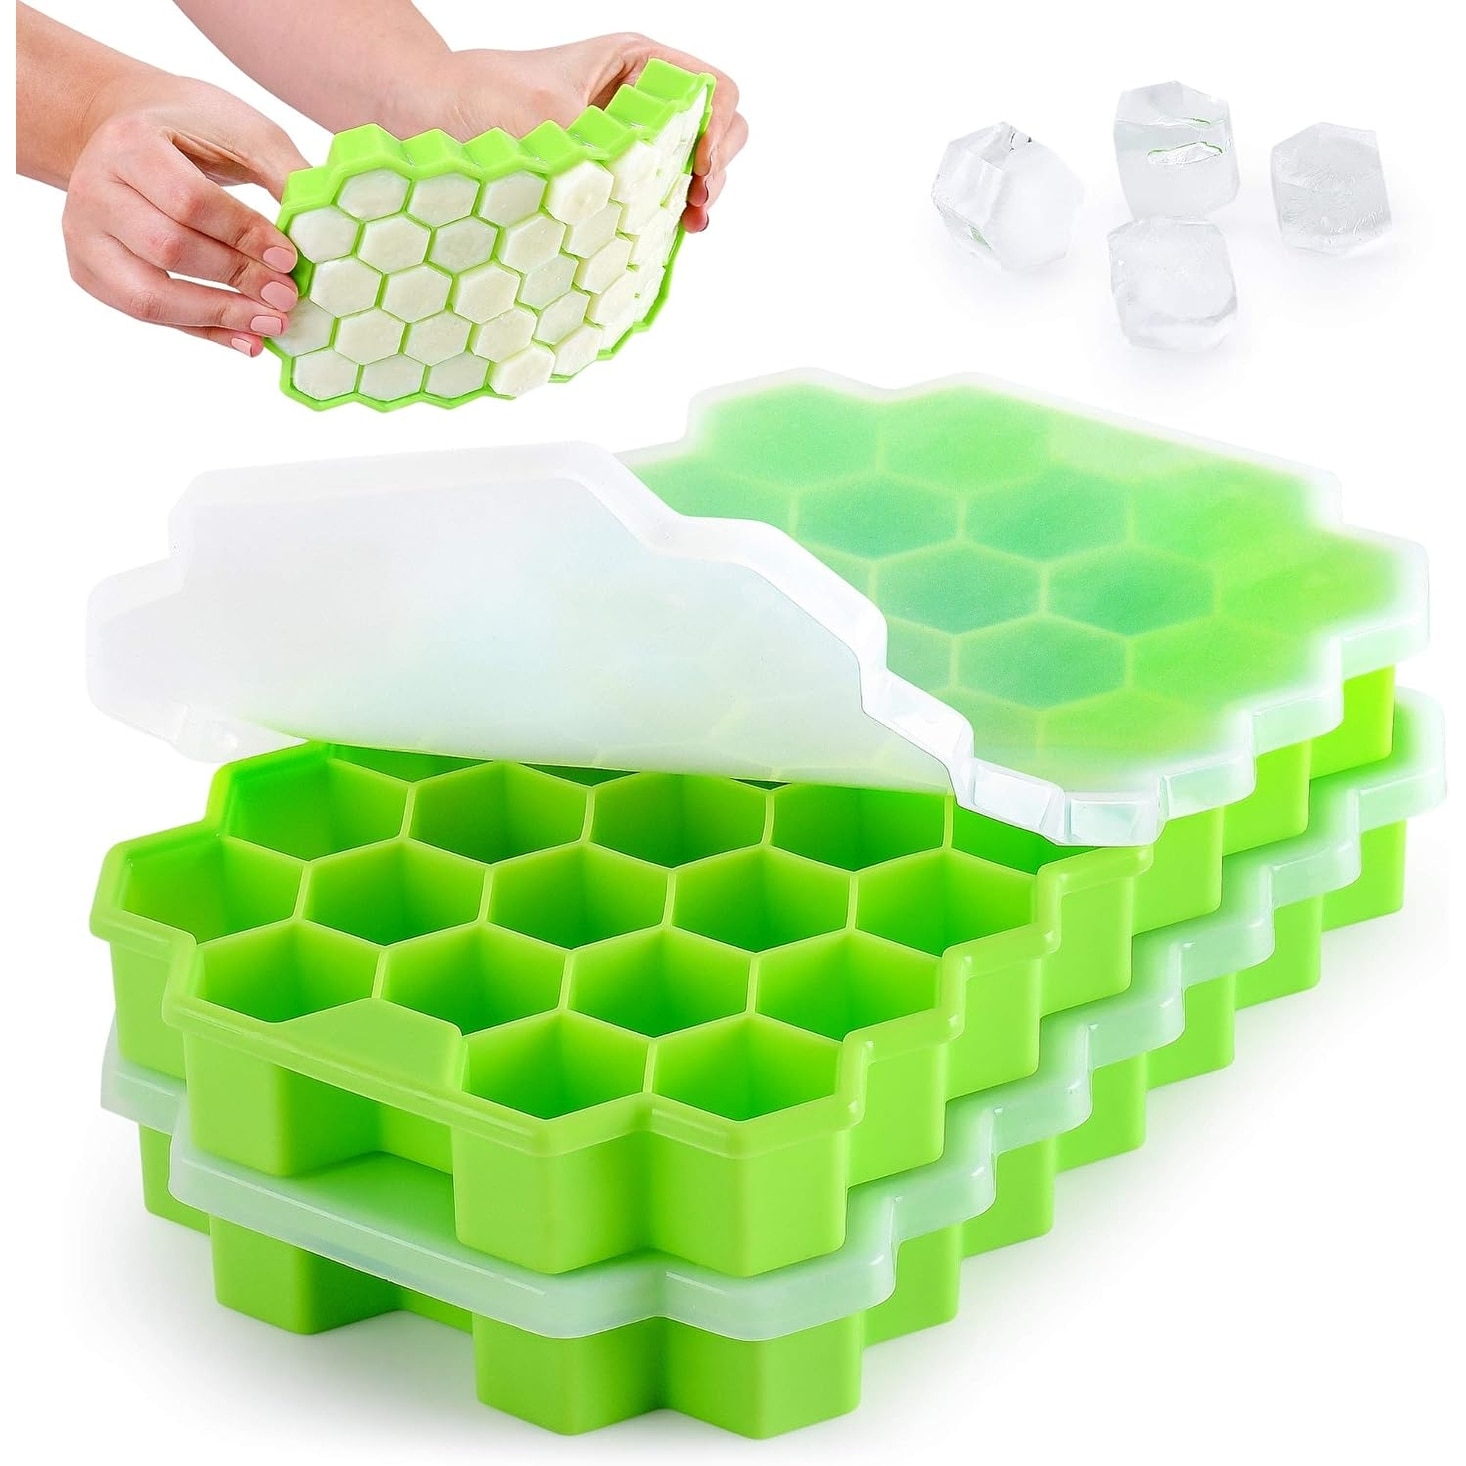 https://ak1.ostkcdn.com/images/products/is/images/direct/3820f8f961675225f7ba1712c92b2e8c9fea1ef7/Zulay-Kitchen-Silicone-Honeycomb-Shaped-Flexible-Ice-Trays-With-Covers-%282-Pack%29.jpg